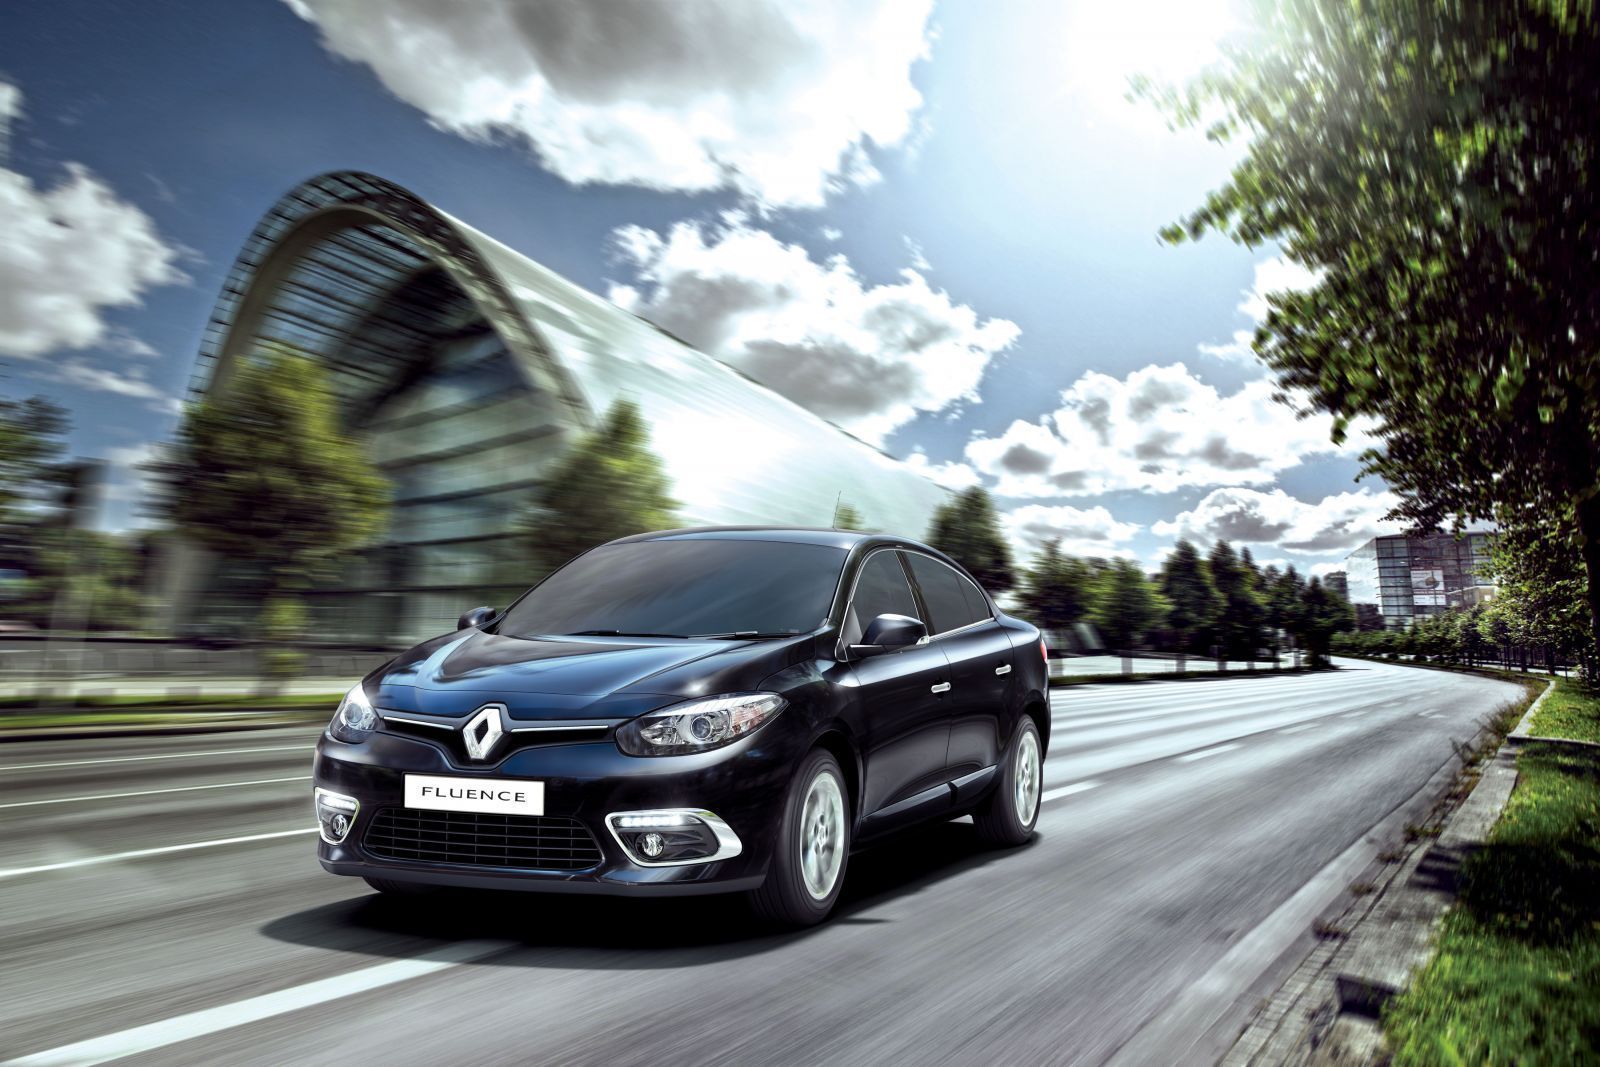 Renault launches Fluence facelift